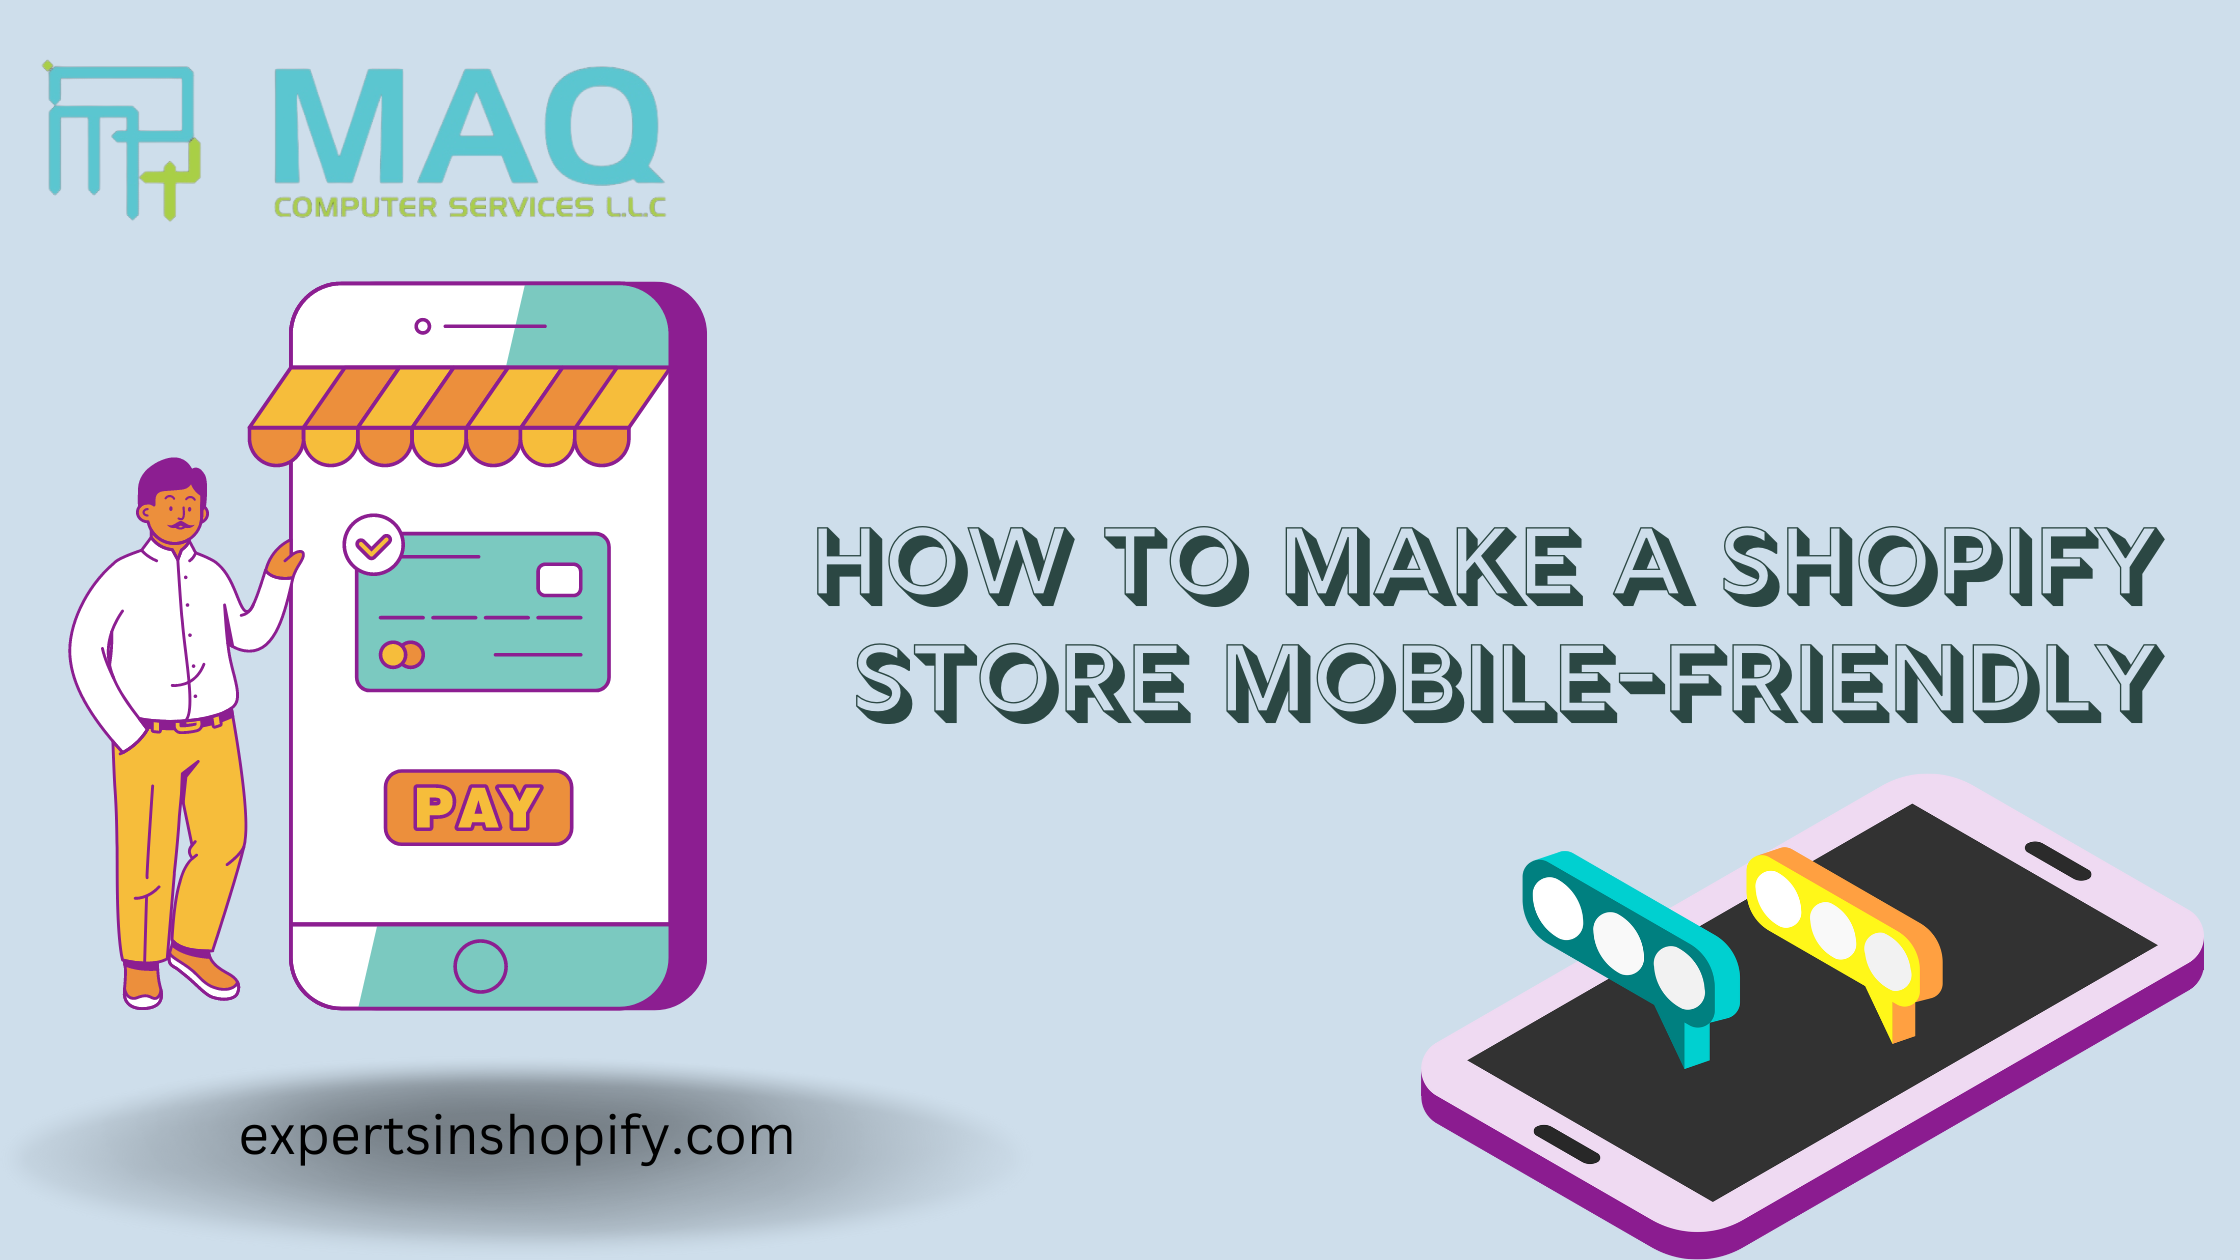 How To Make A Shopify Store Mobile-Friendly